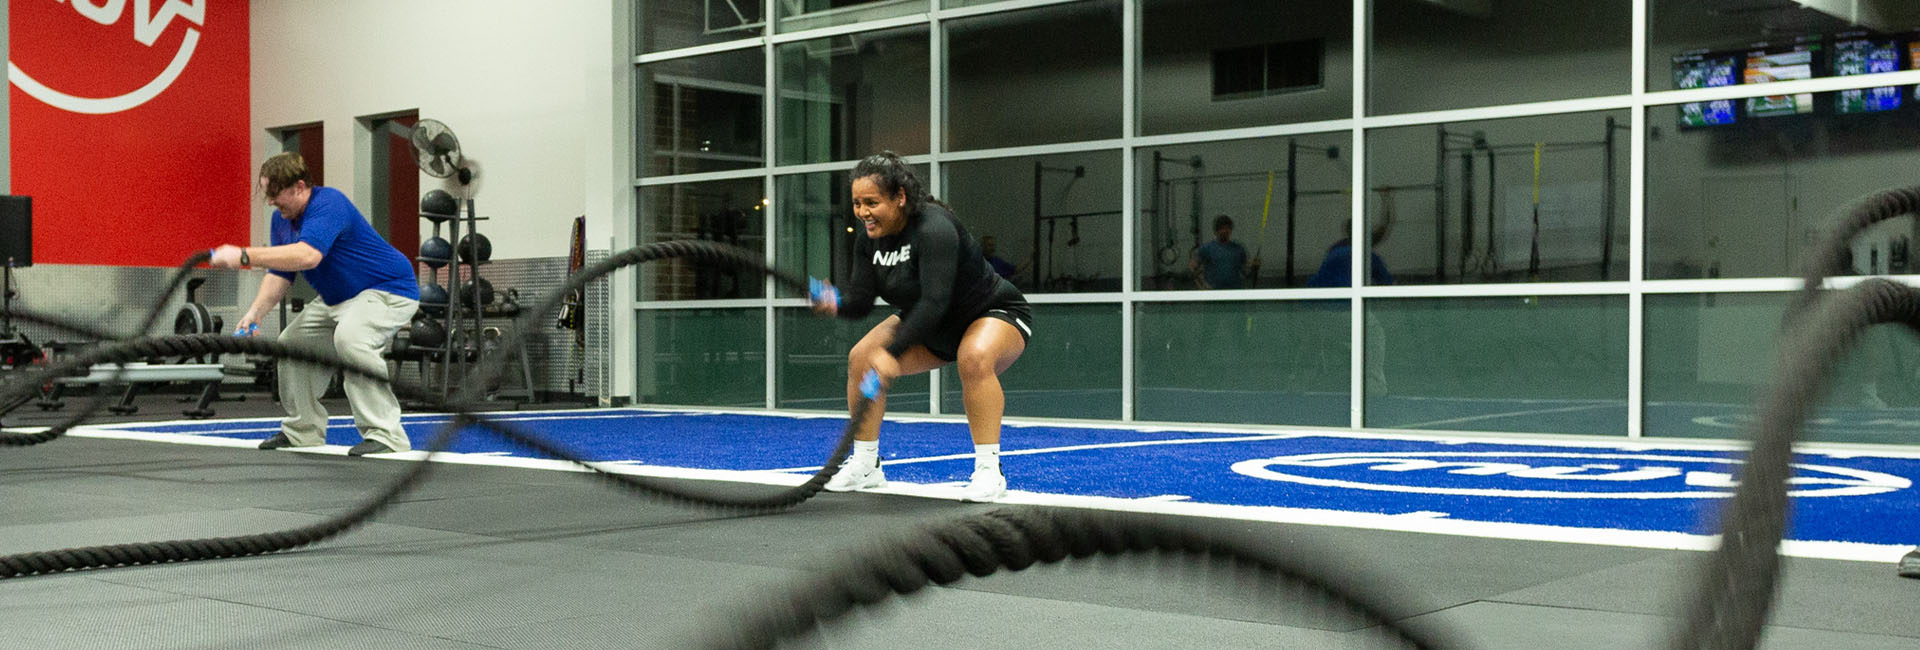 people using battle ropes to workout